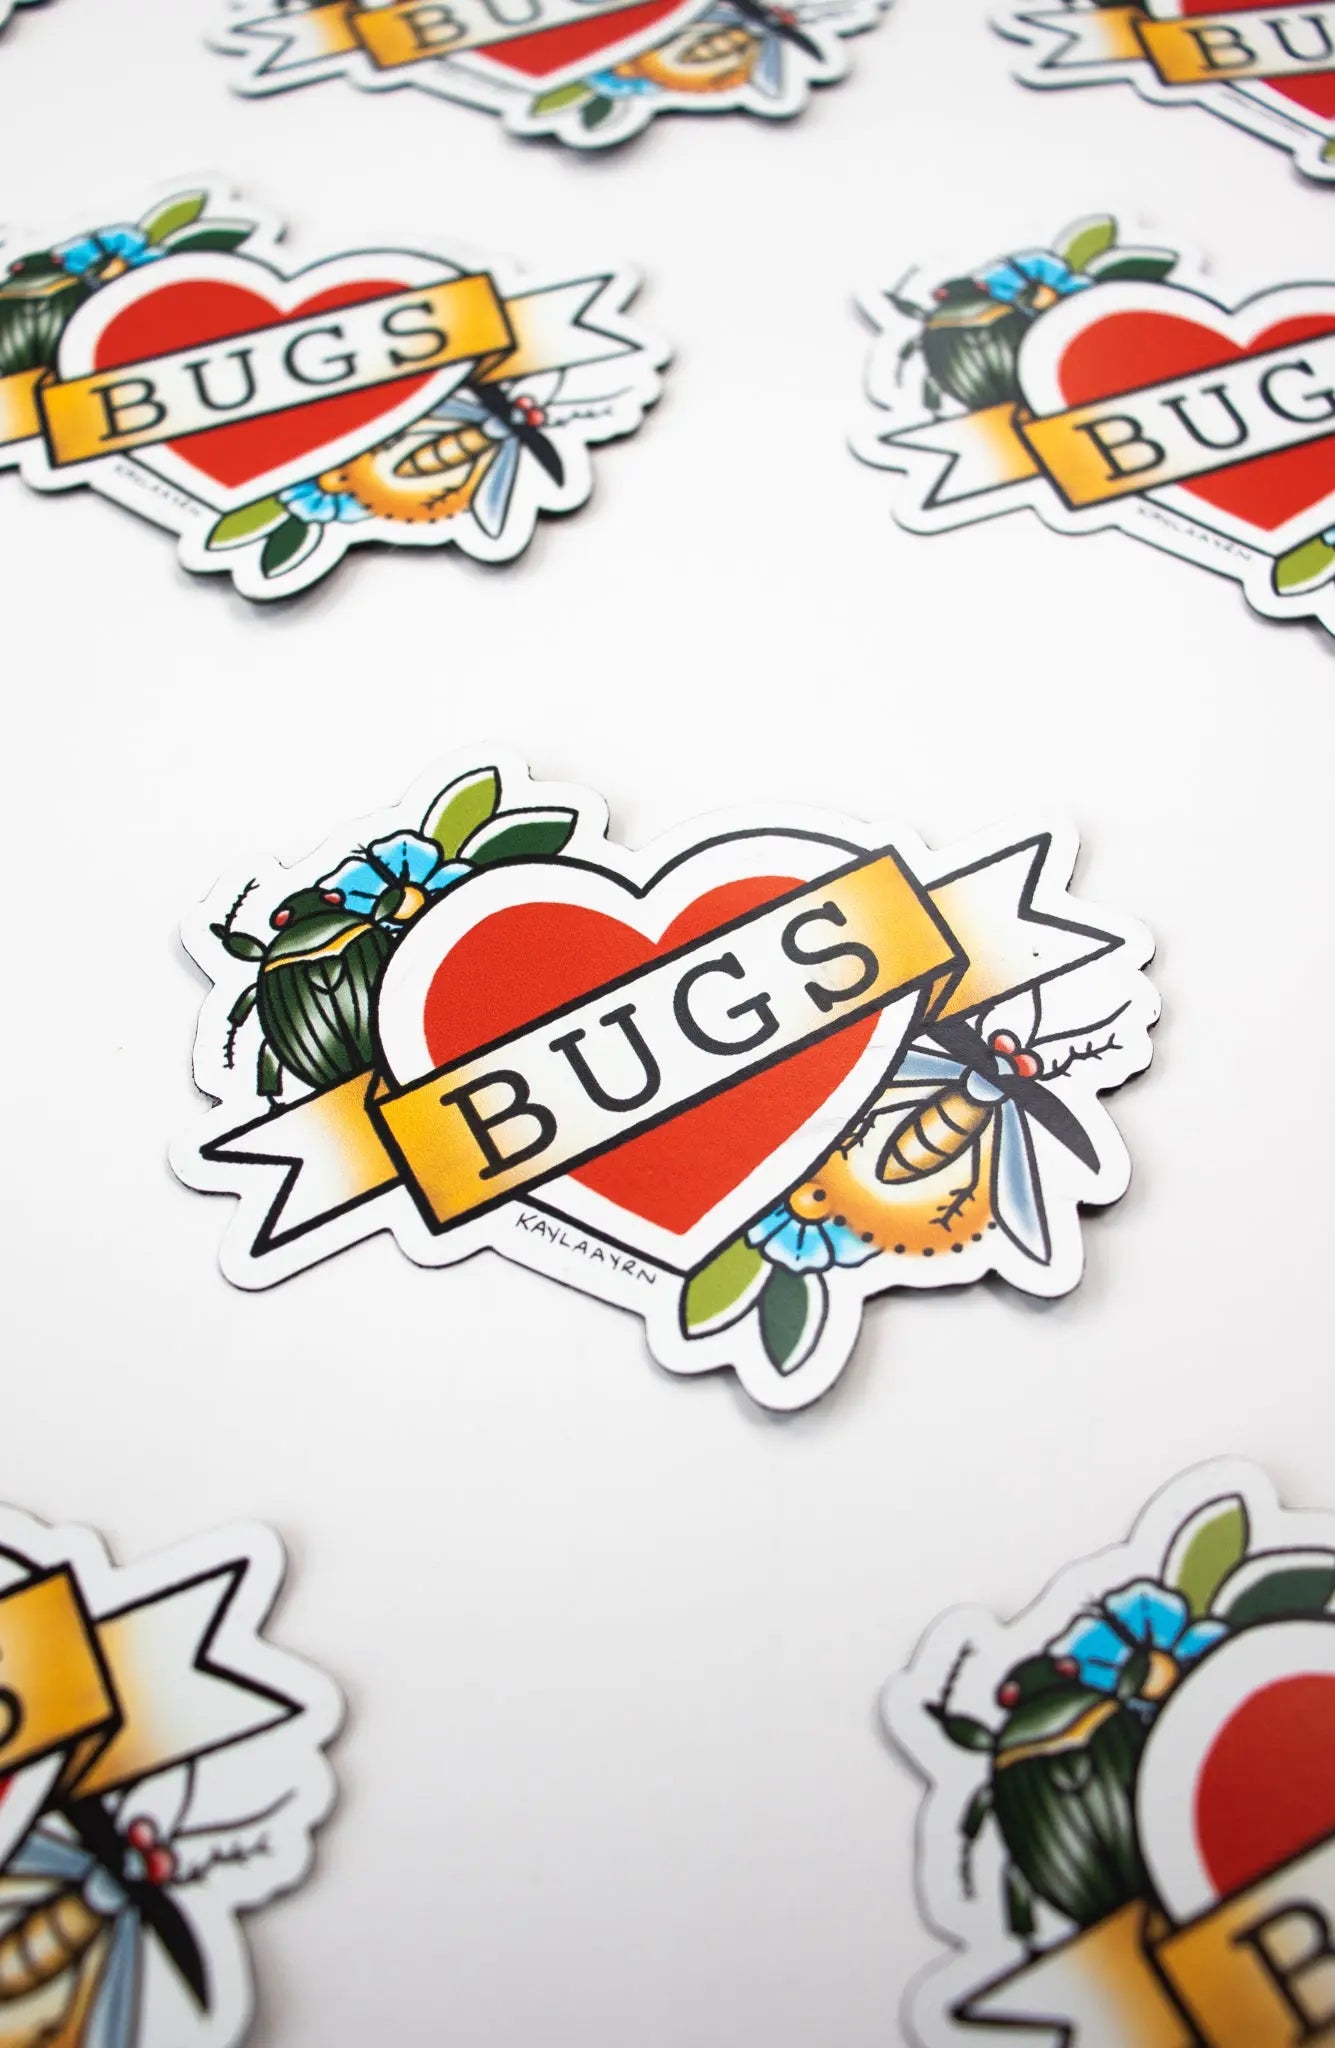 "BUGS" Magnet - THE STEMCELL SCIENCE SHOP